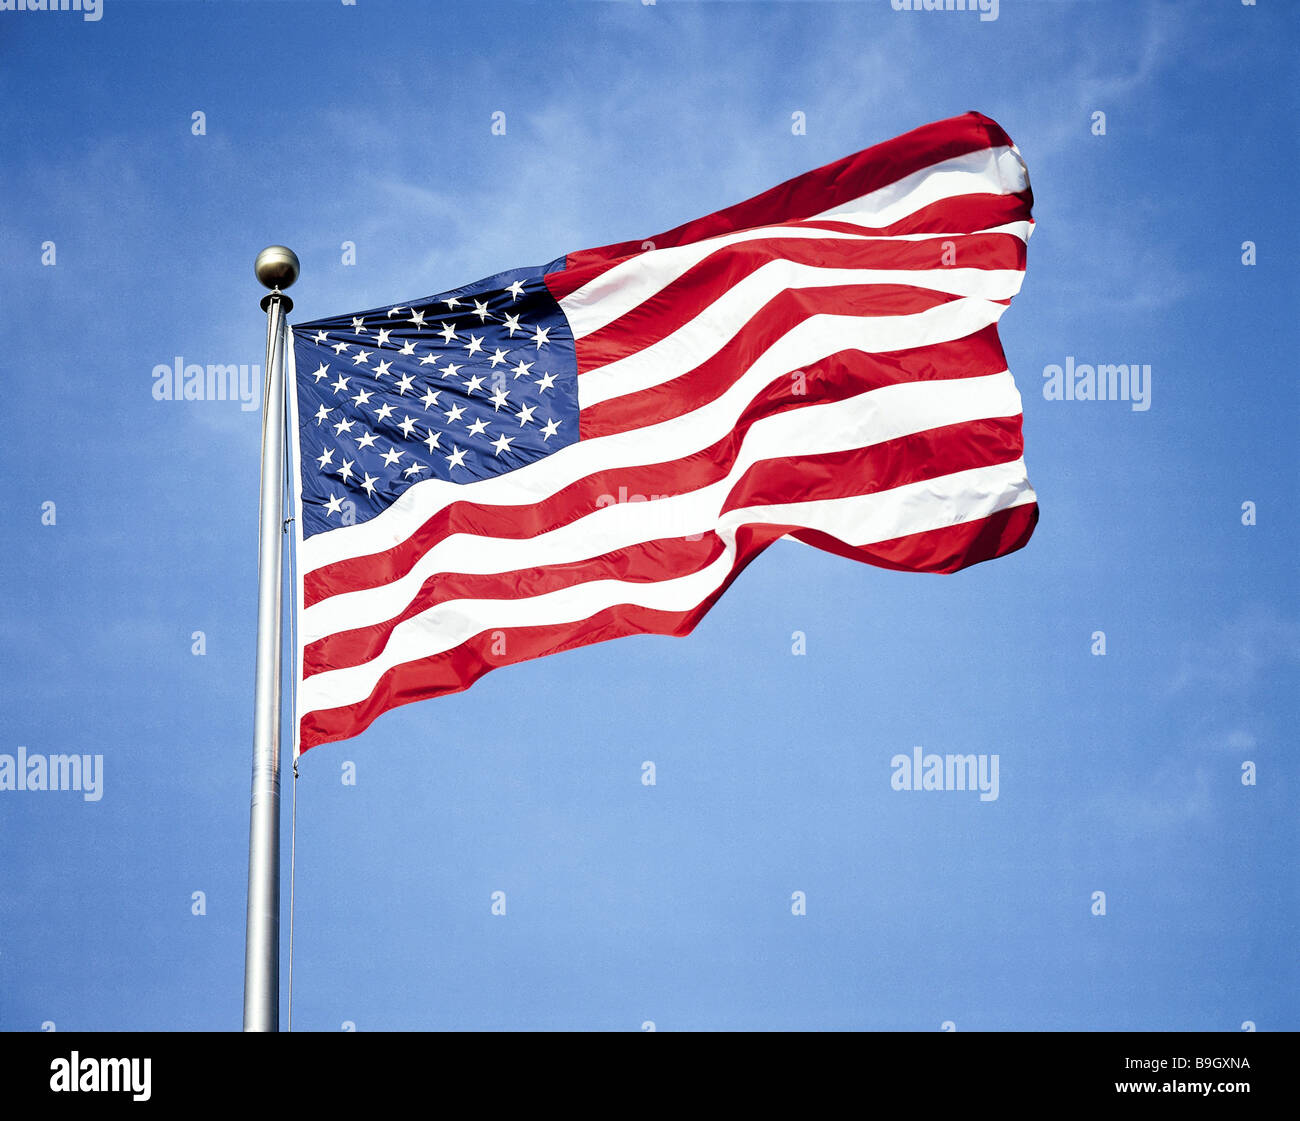 flagpole American flag America North America flag national-flags ensign national-colors wind blows patriotism national-pride Stock Photo